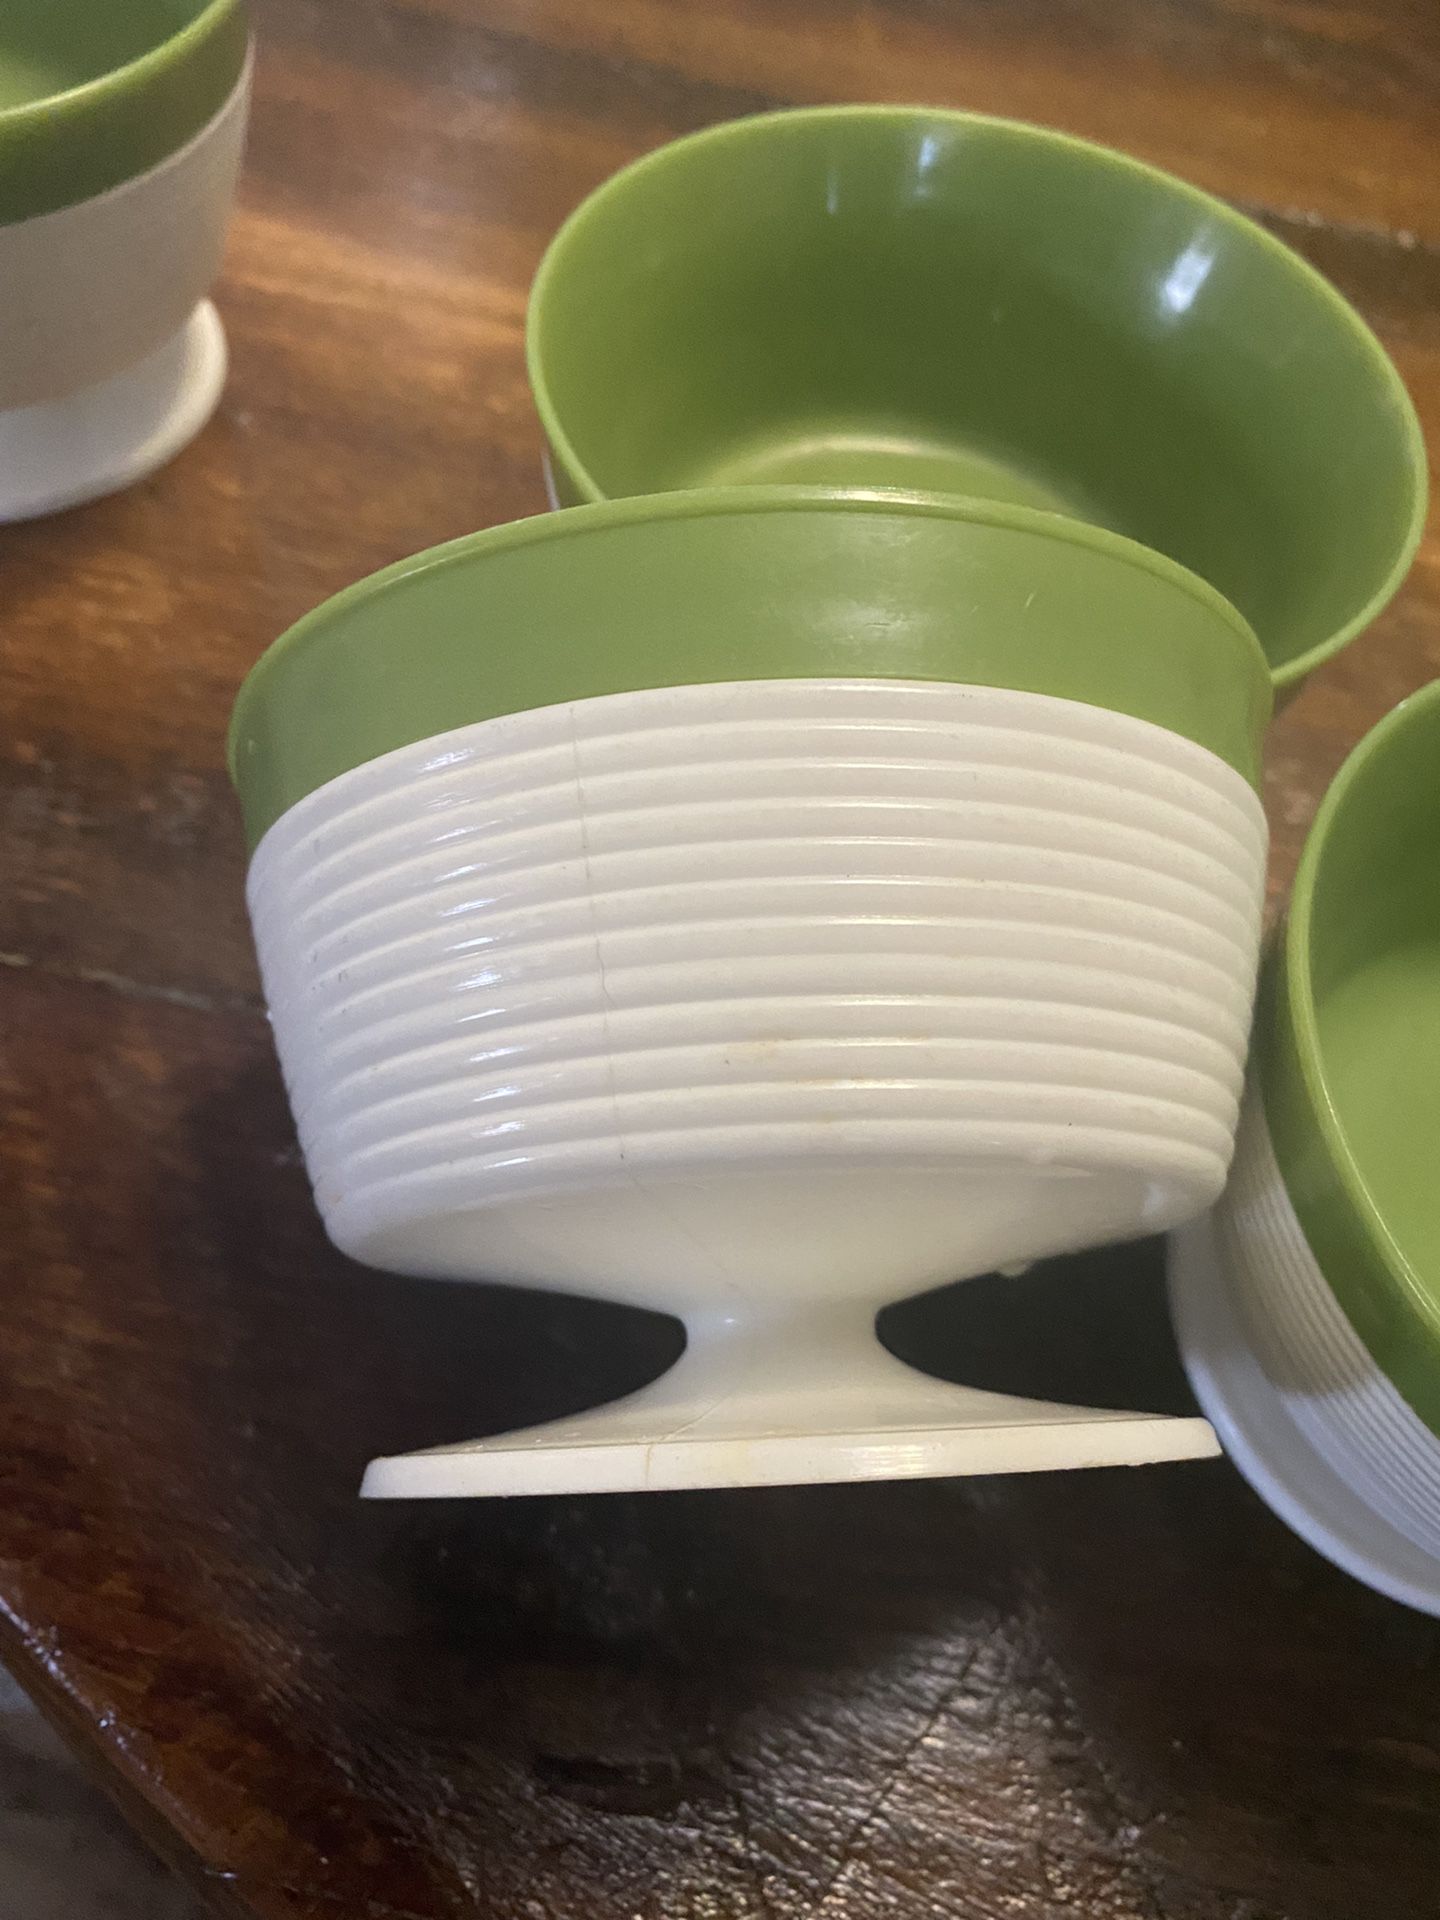 Lot of 7 Green & White Raffiaware by Thermo Temp footed insulated dessert dishes.    Vintage Green and White Raffiaware by Thermo Temp footed insualte